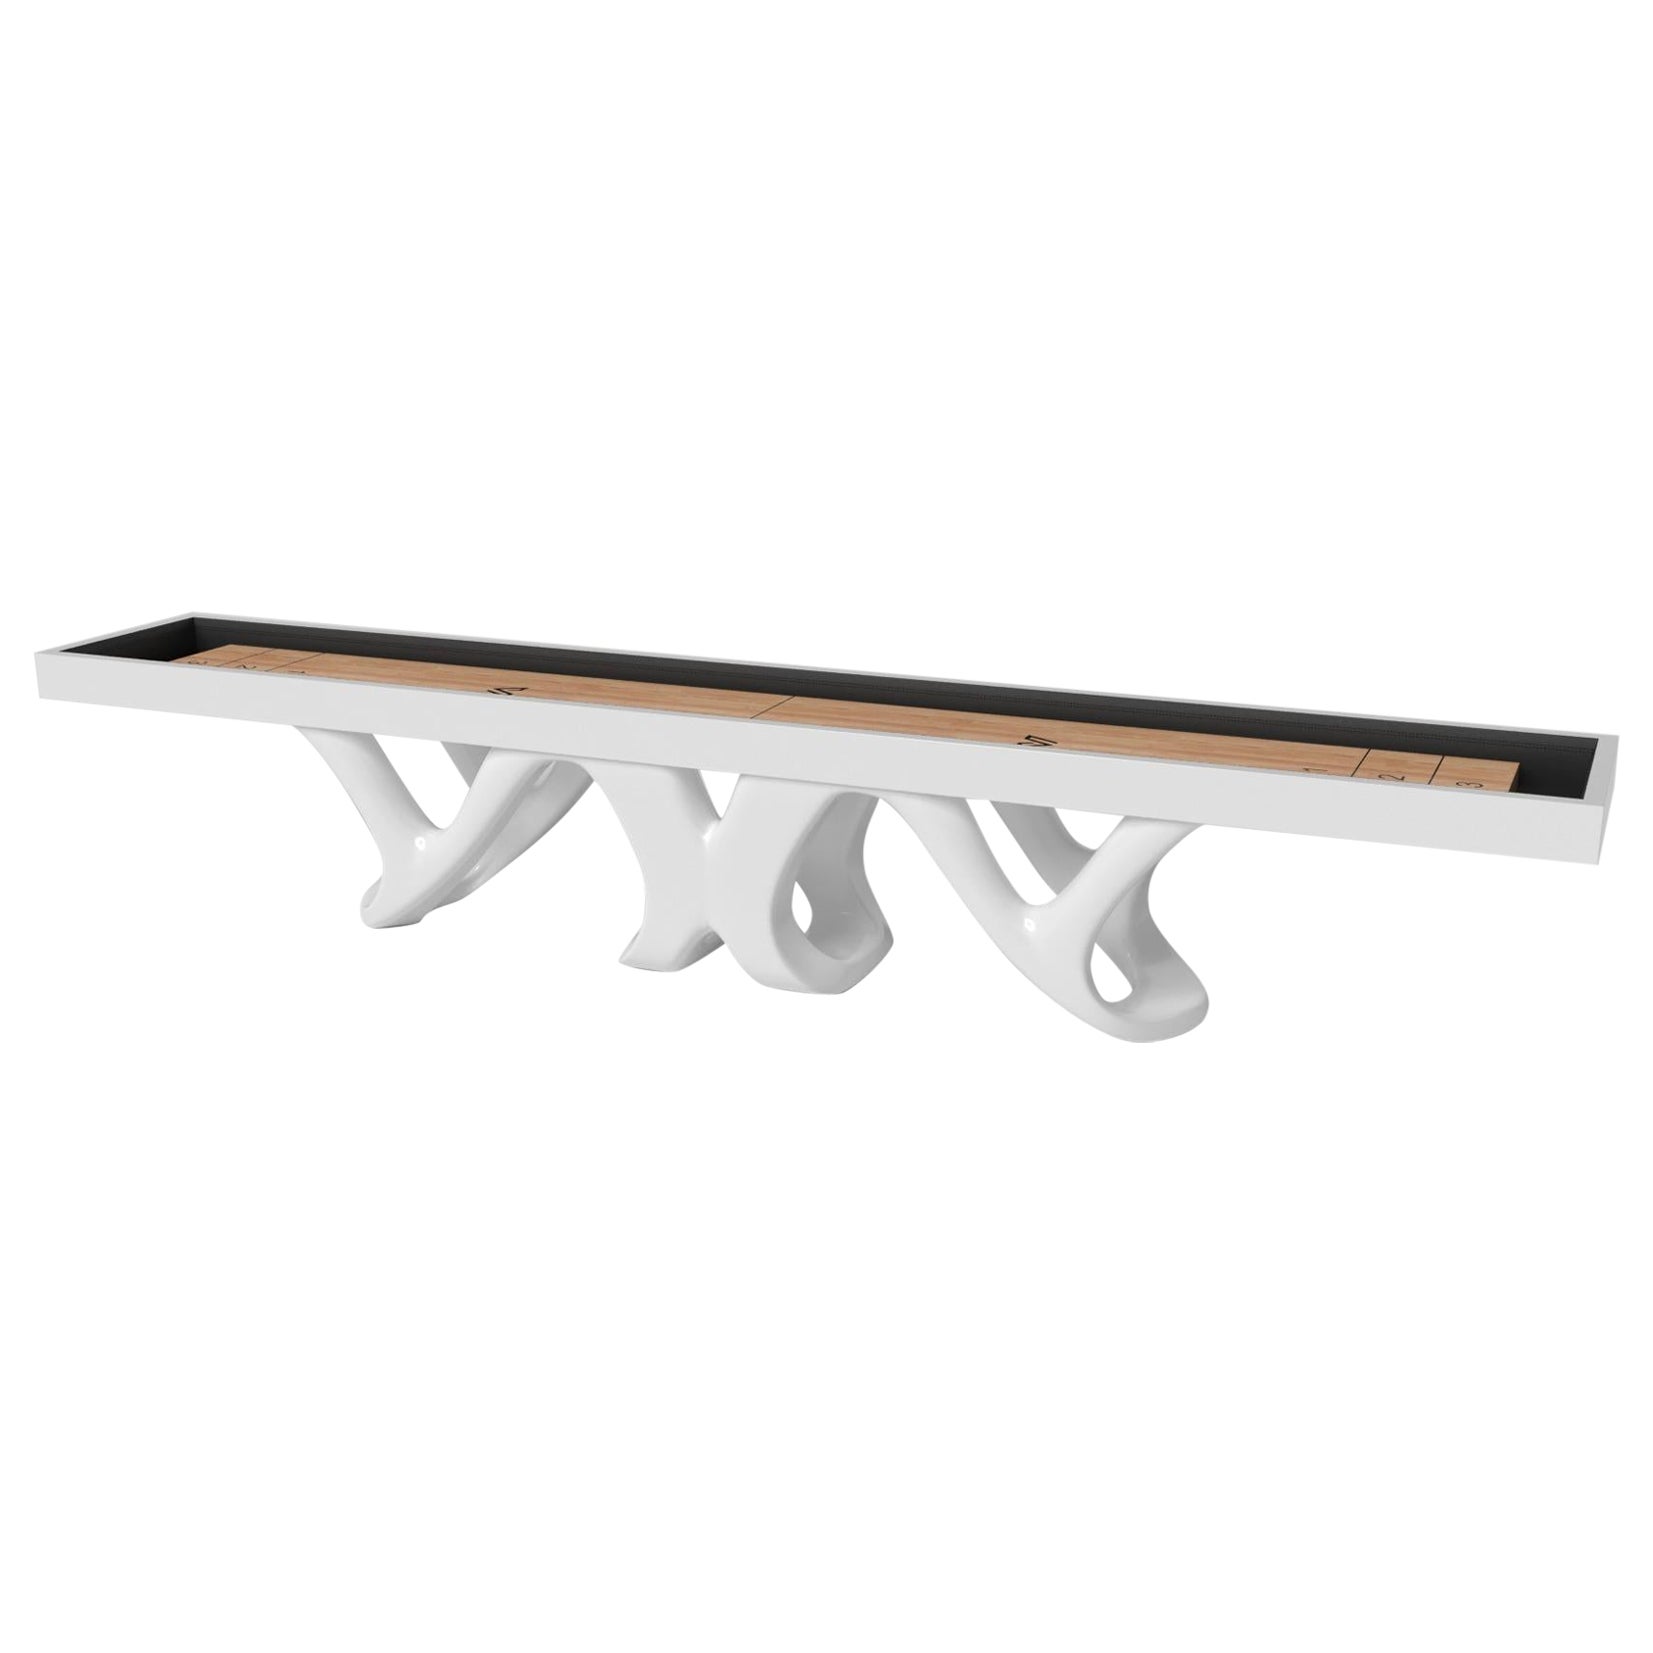 Elevate Customs Draco Shuffleboard Tables /Solid Pantone White Color in 18' -USA